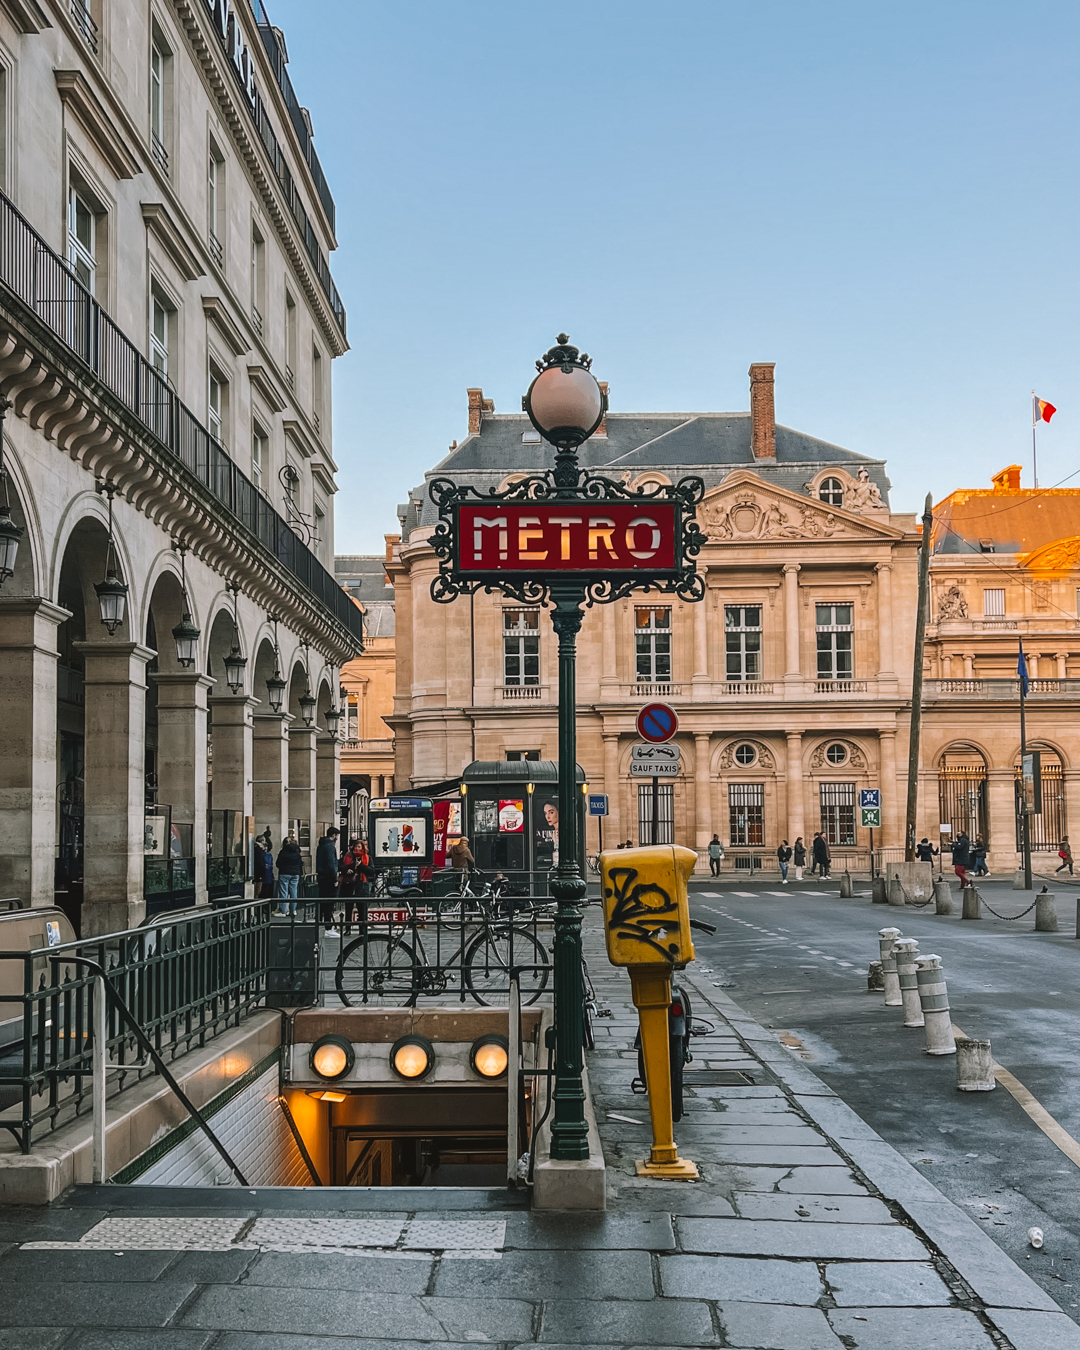 The streets of Paris with a Metro station sign in the shot